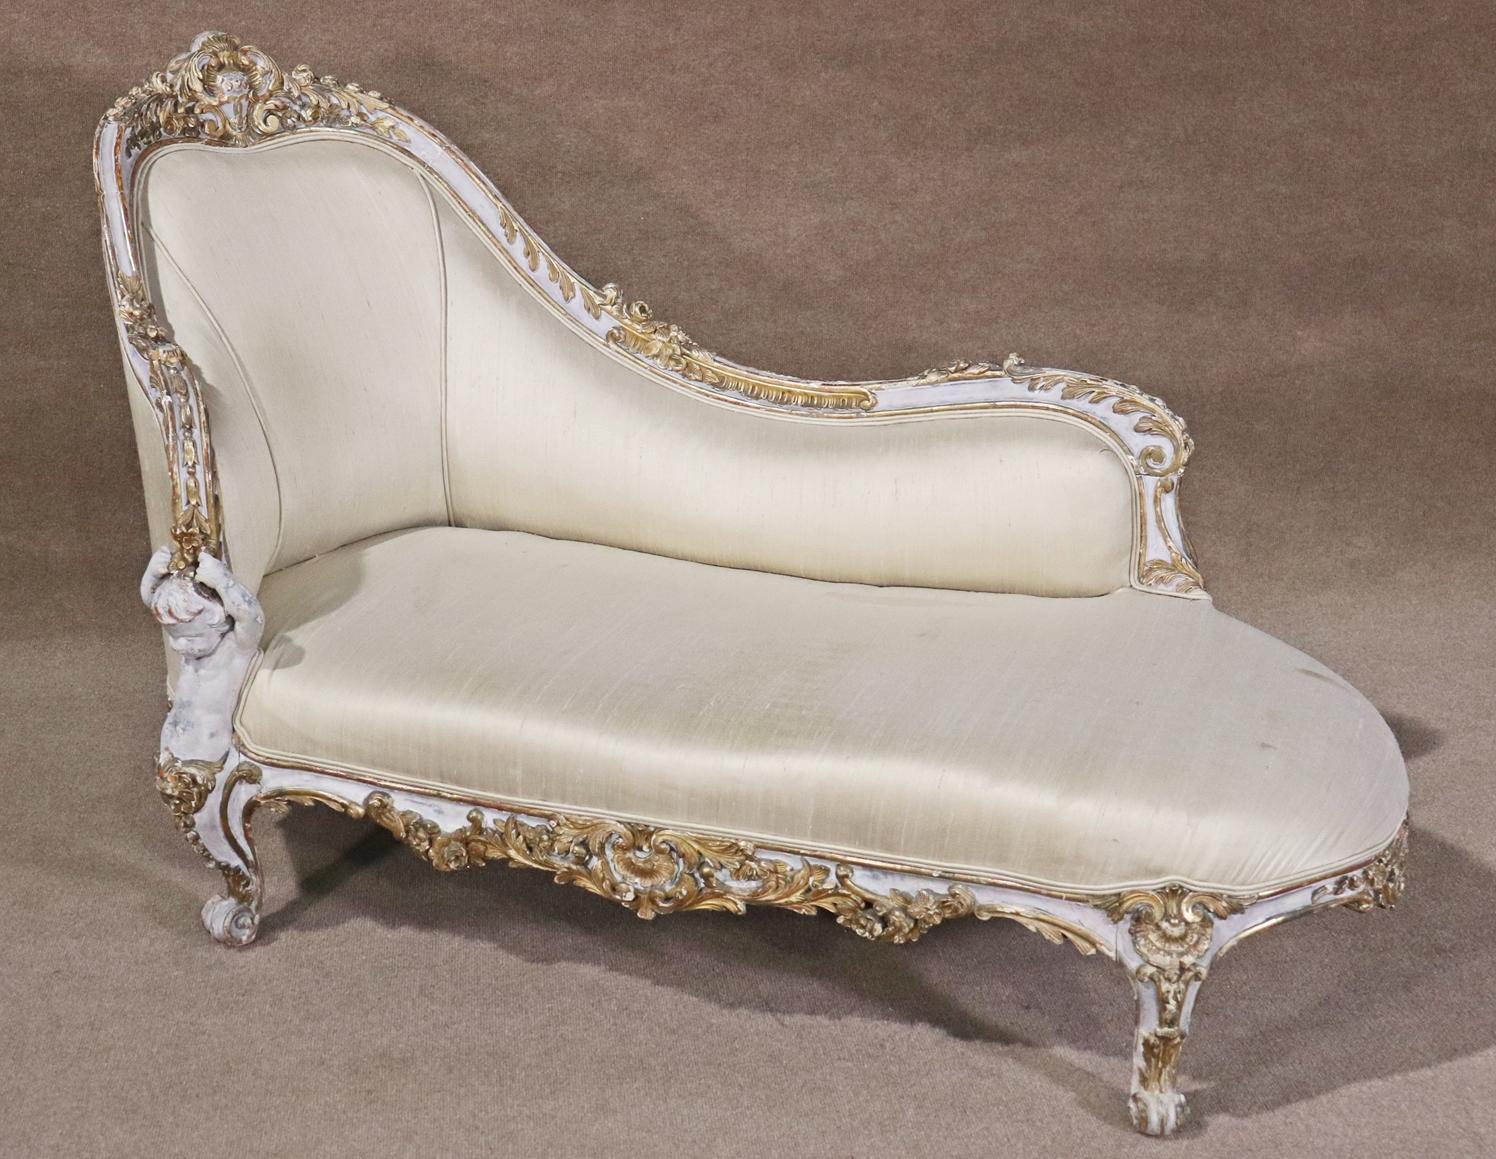 Louis XV Rare Paint Decorated and Gilded Meridian Chaise Daybed with Putti Cherubs